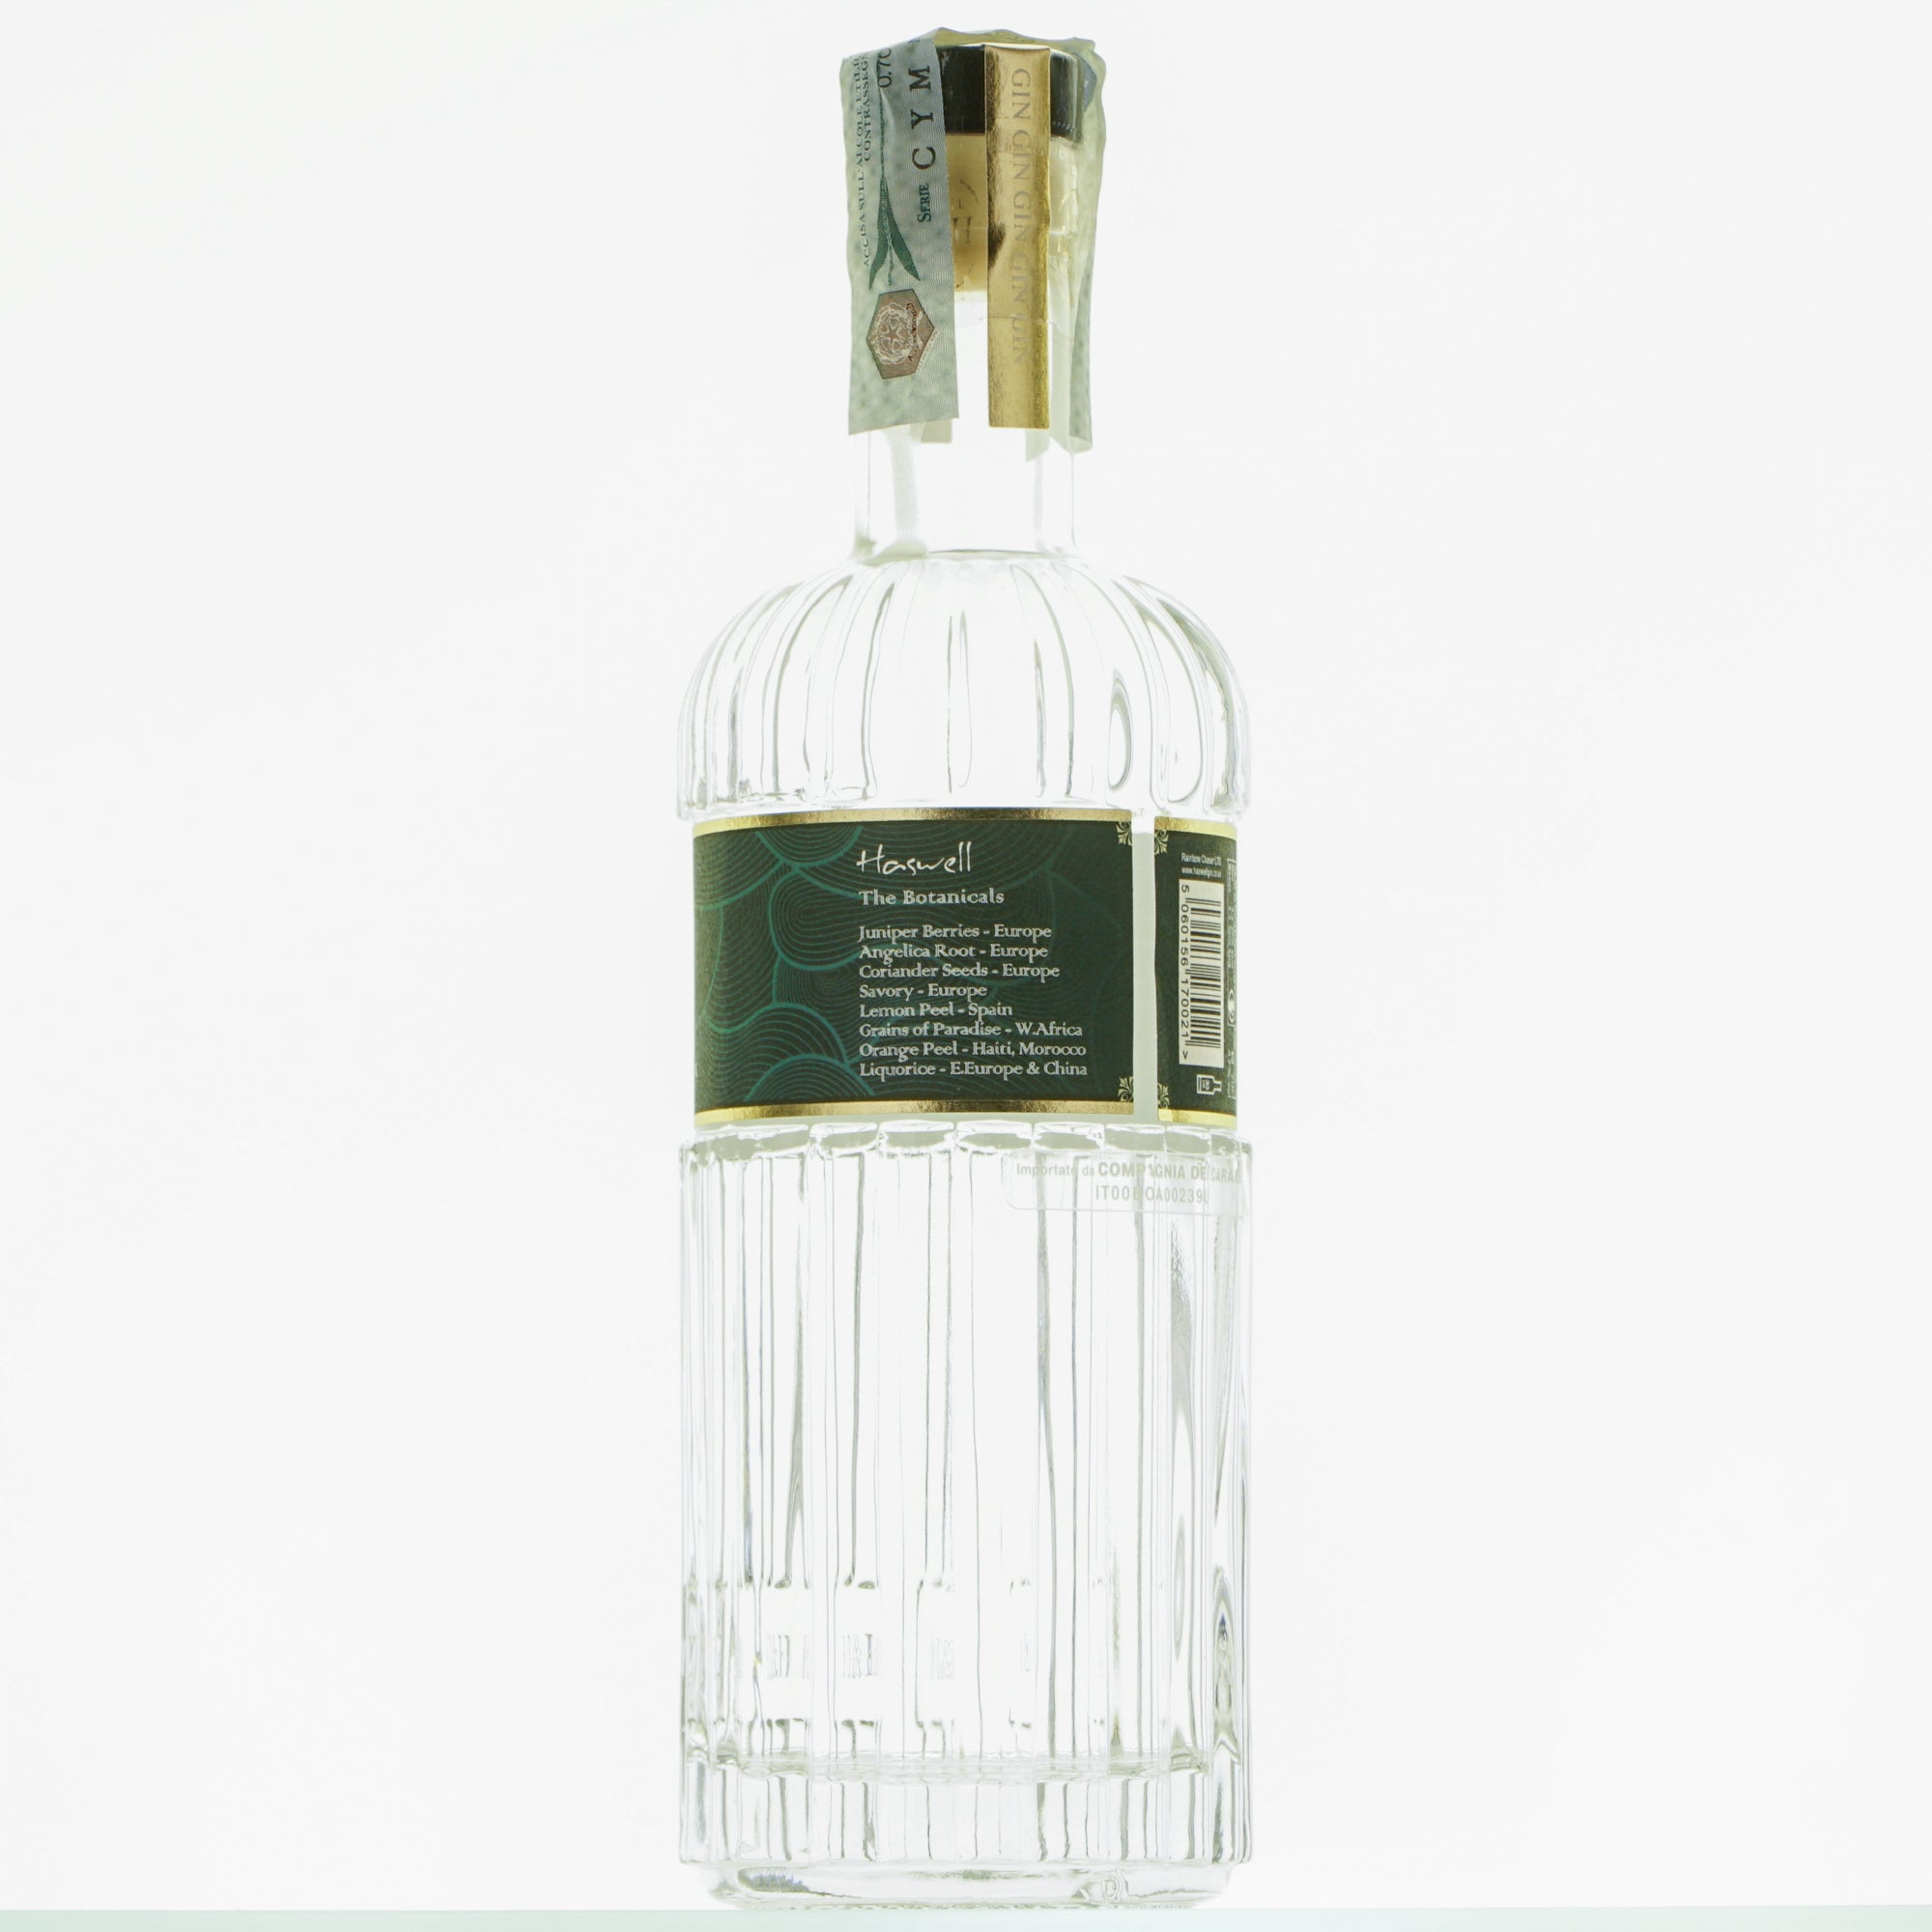 Haswell London Dry Gin 47°, l0.7